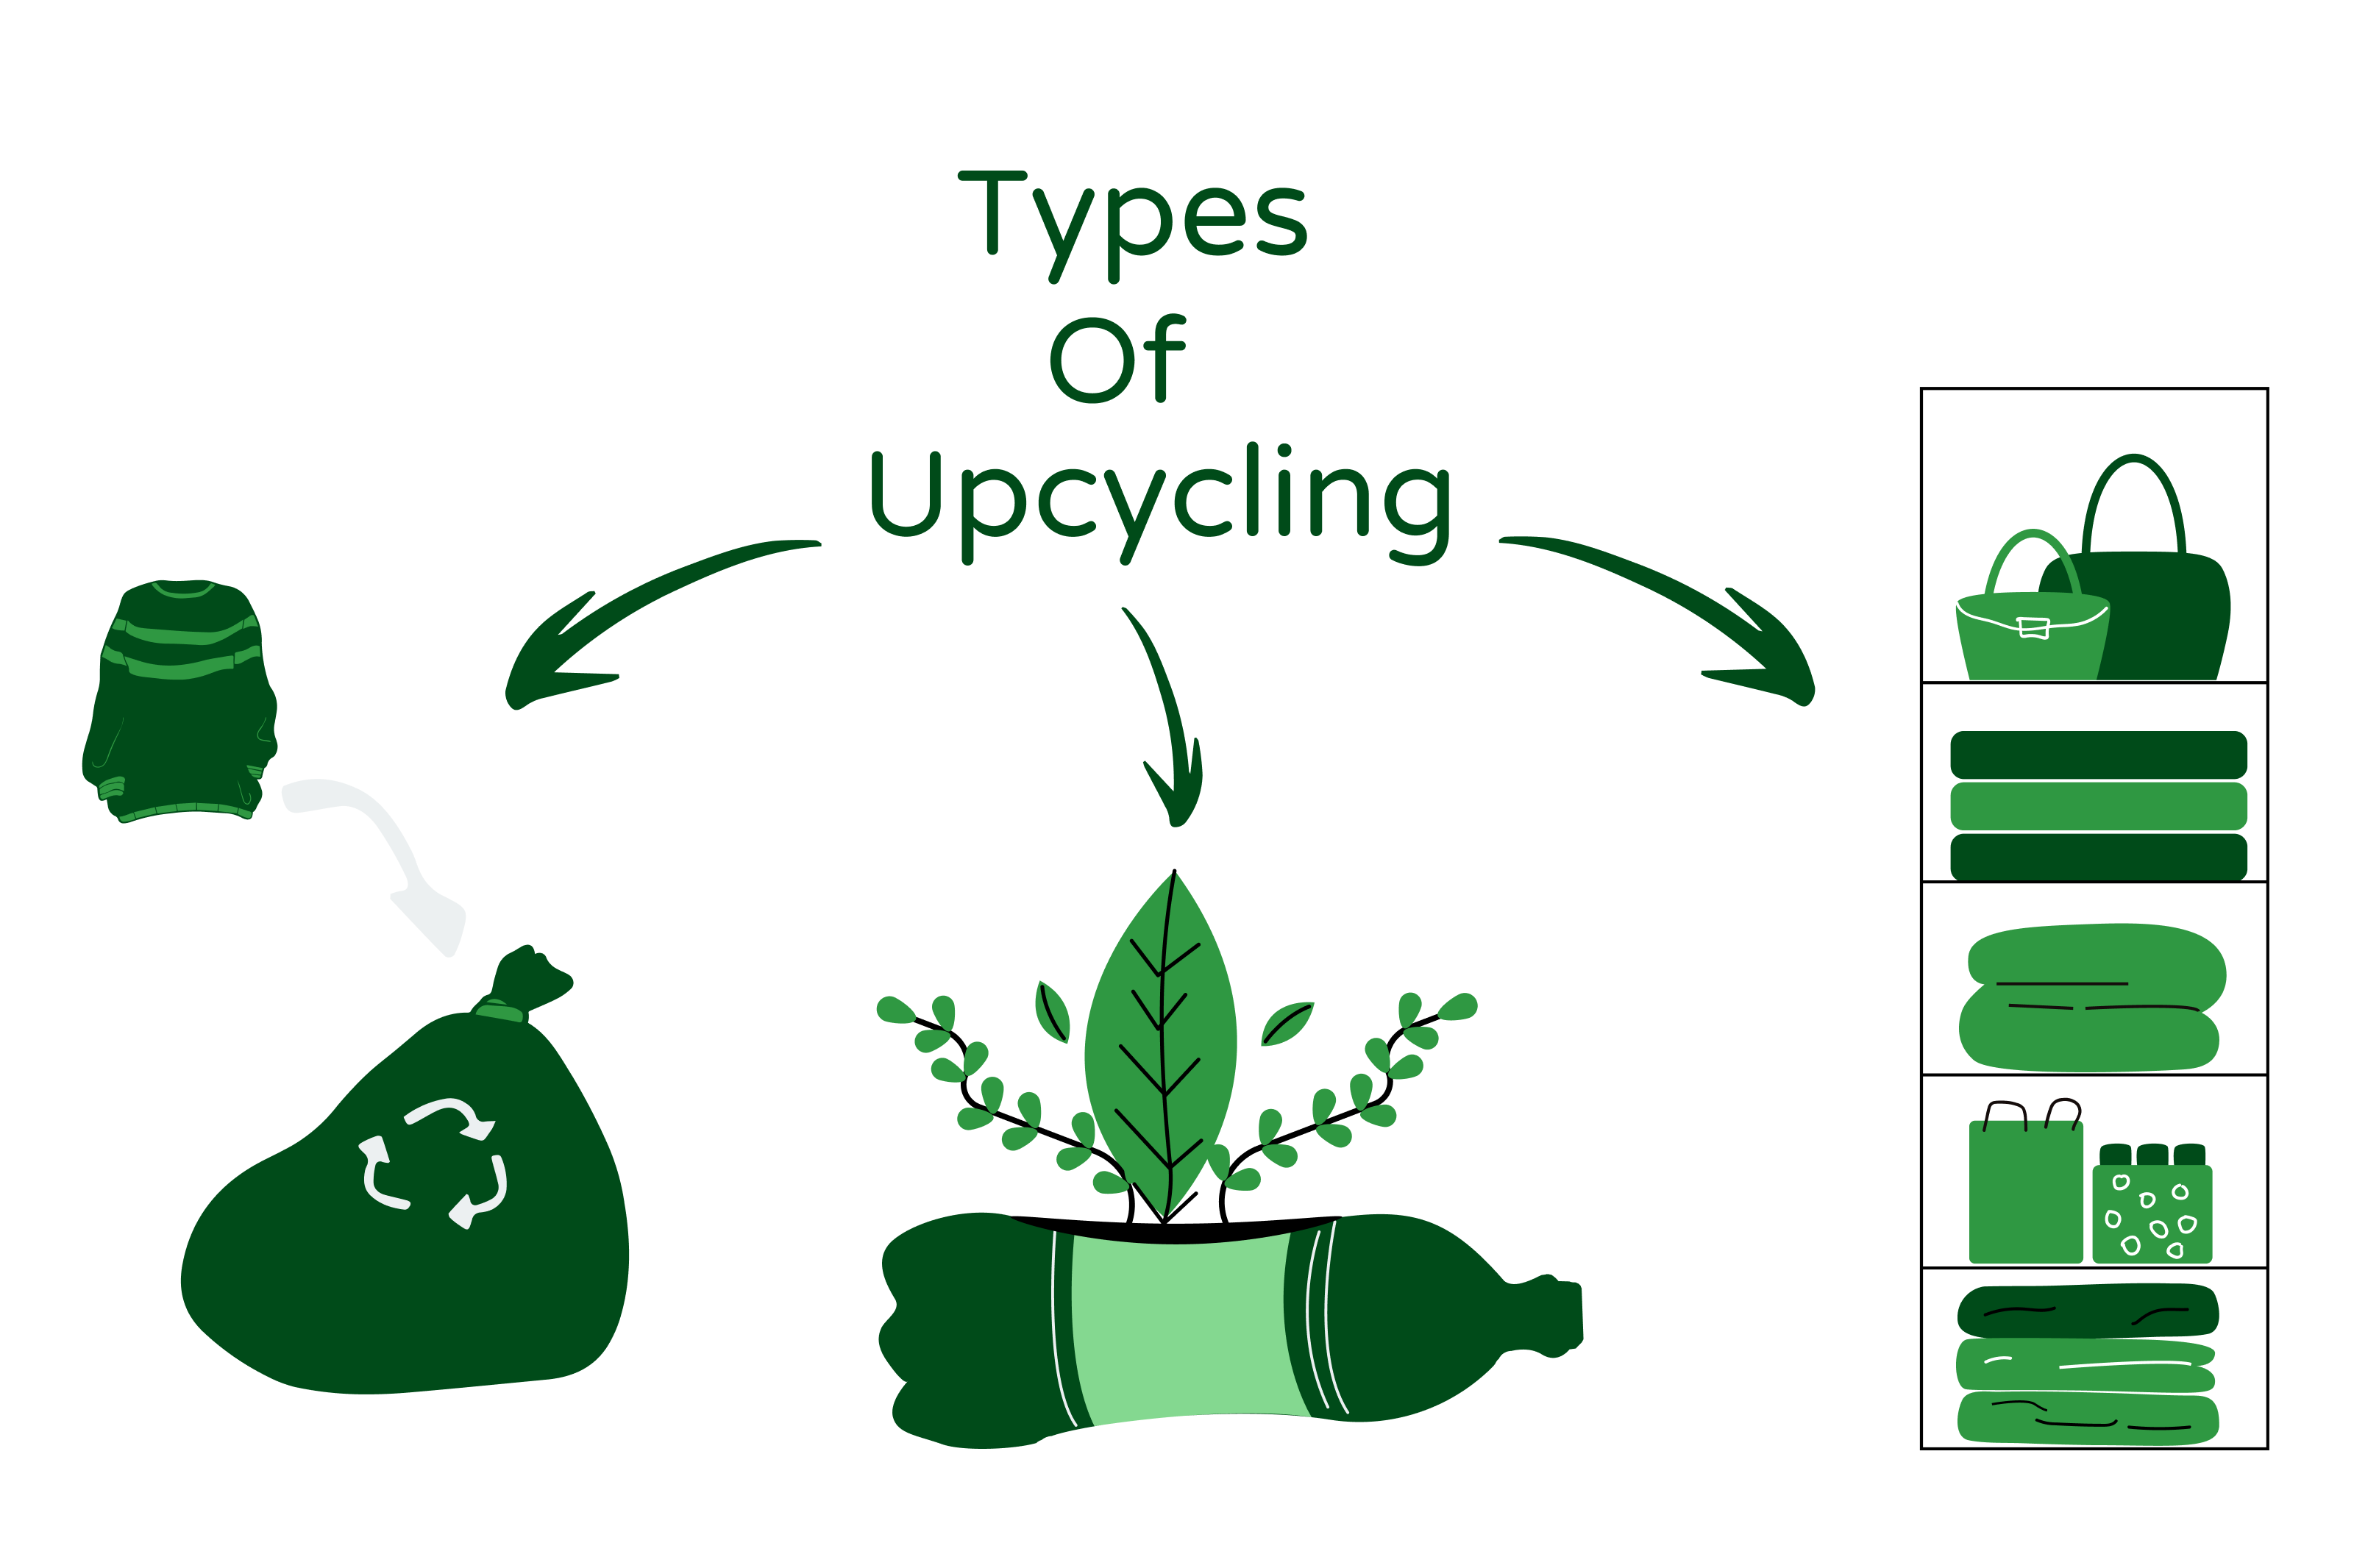 An image showcasing three types of upcycling. The first type is represented by a quilt, bags, and accessories made from old clothes. The second type is represented by decorative items and planters made from discarded bottles or jars. The third type is represented by unique storage solutions made from worn-out furniture.